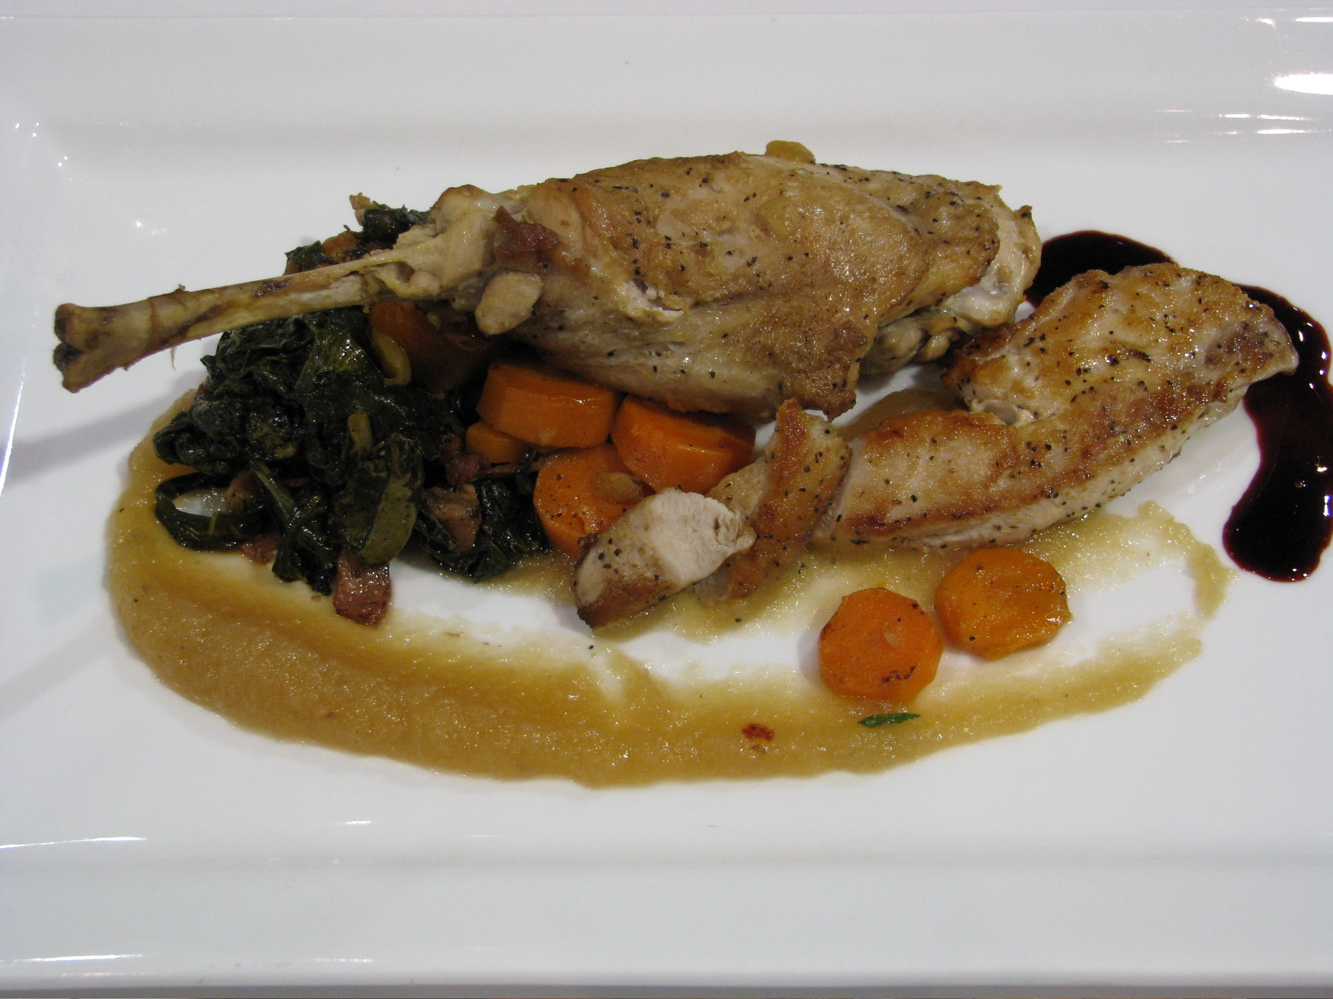 Iron Chef Final Round dish by Chef Jacob Peck and Sous Chef Greg Wallis of Forty Two. Roasted rabbit with a raspberry coulis, sweet applesauce, carrots and greens w/bacon. This was the winning dish.